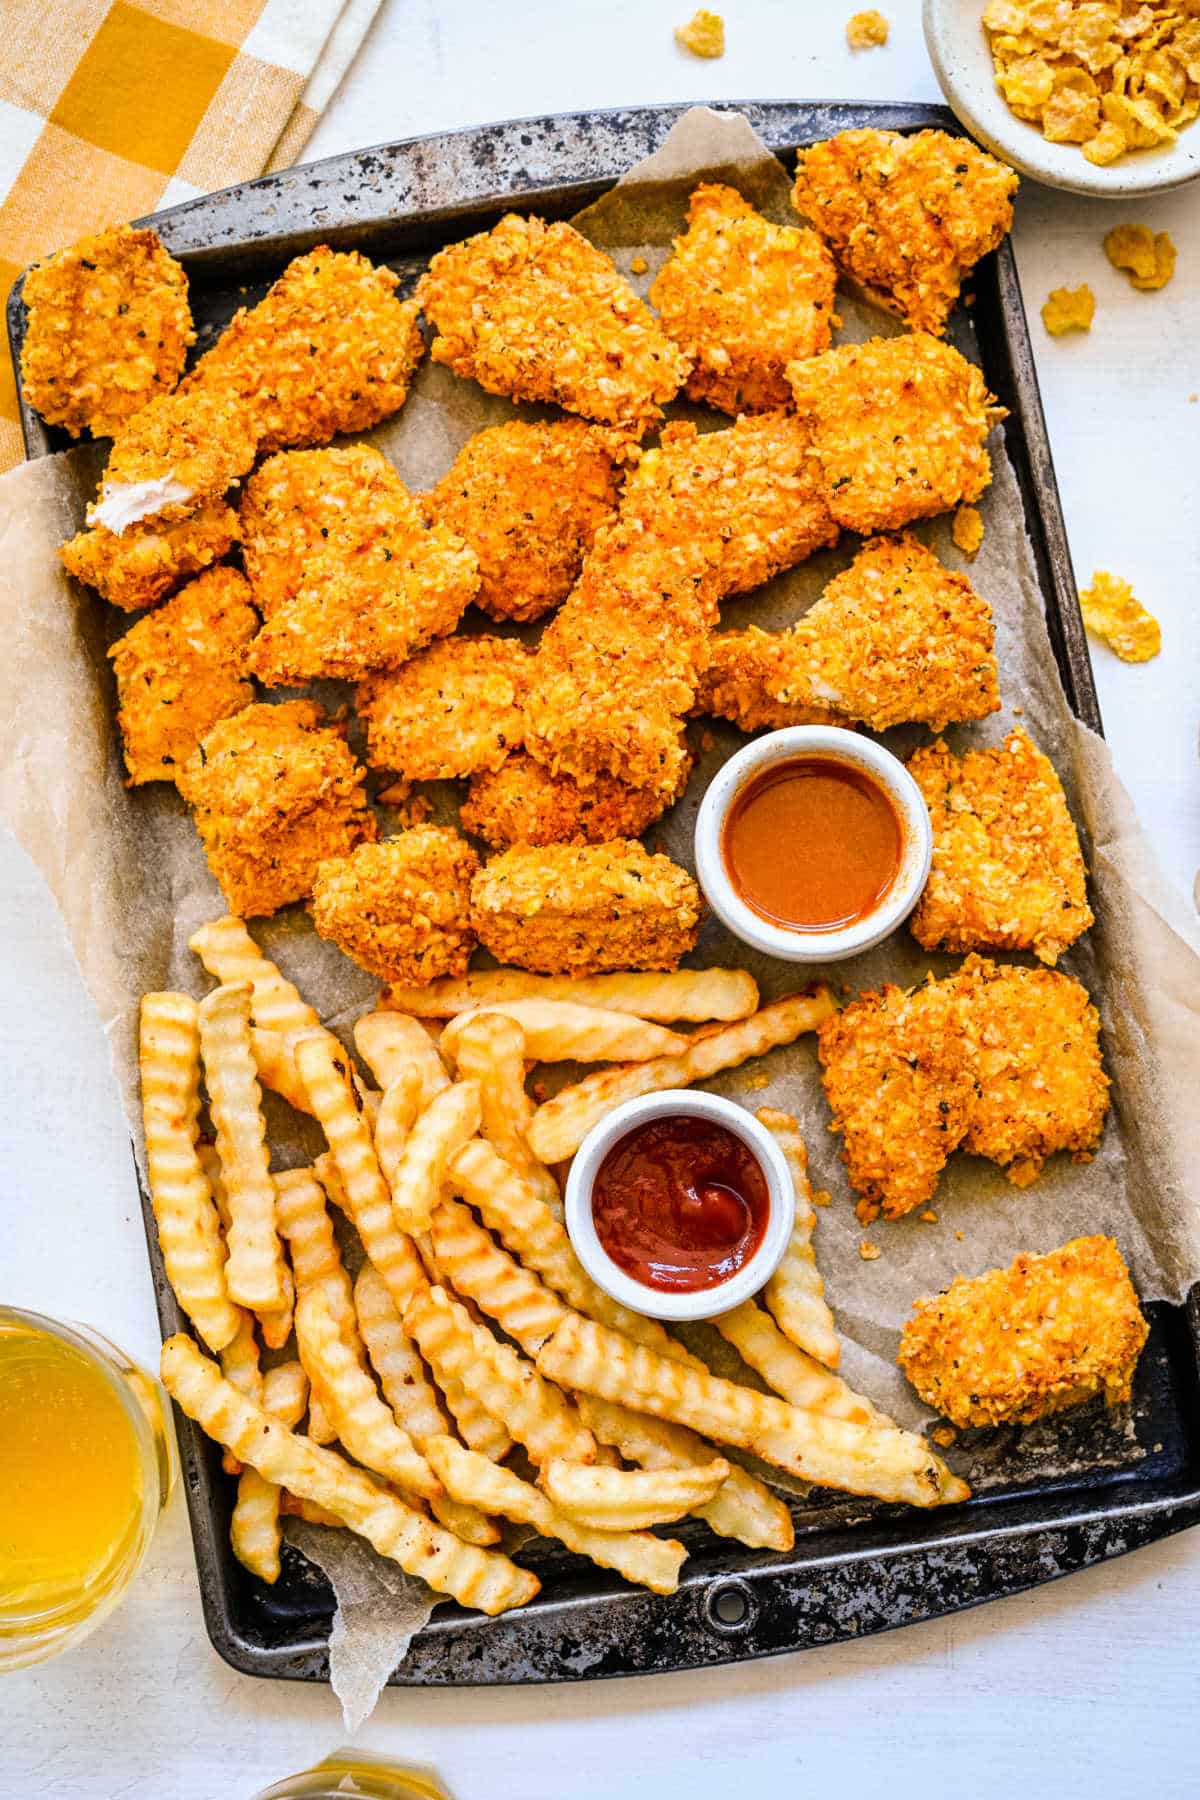 A tray of crunchy baked chicken nuggets and fries with dishes of ketchup and bbq.